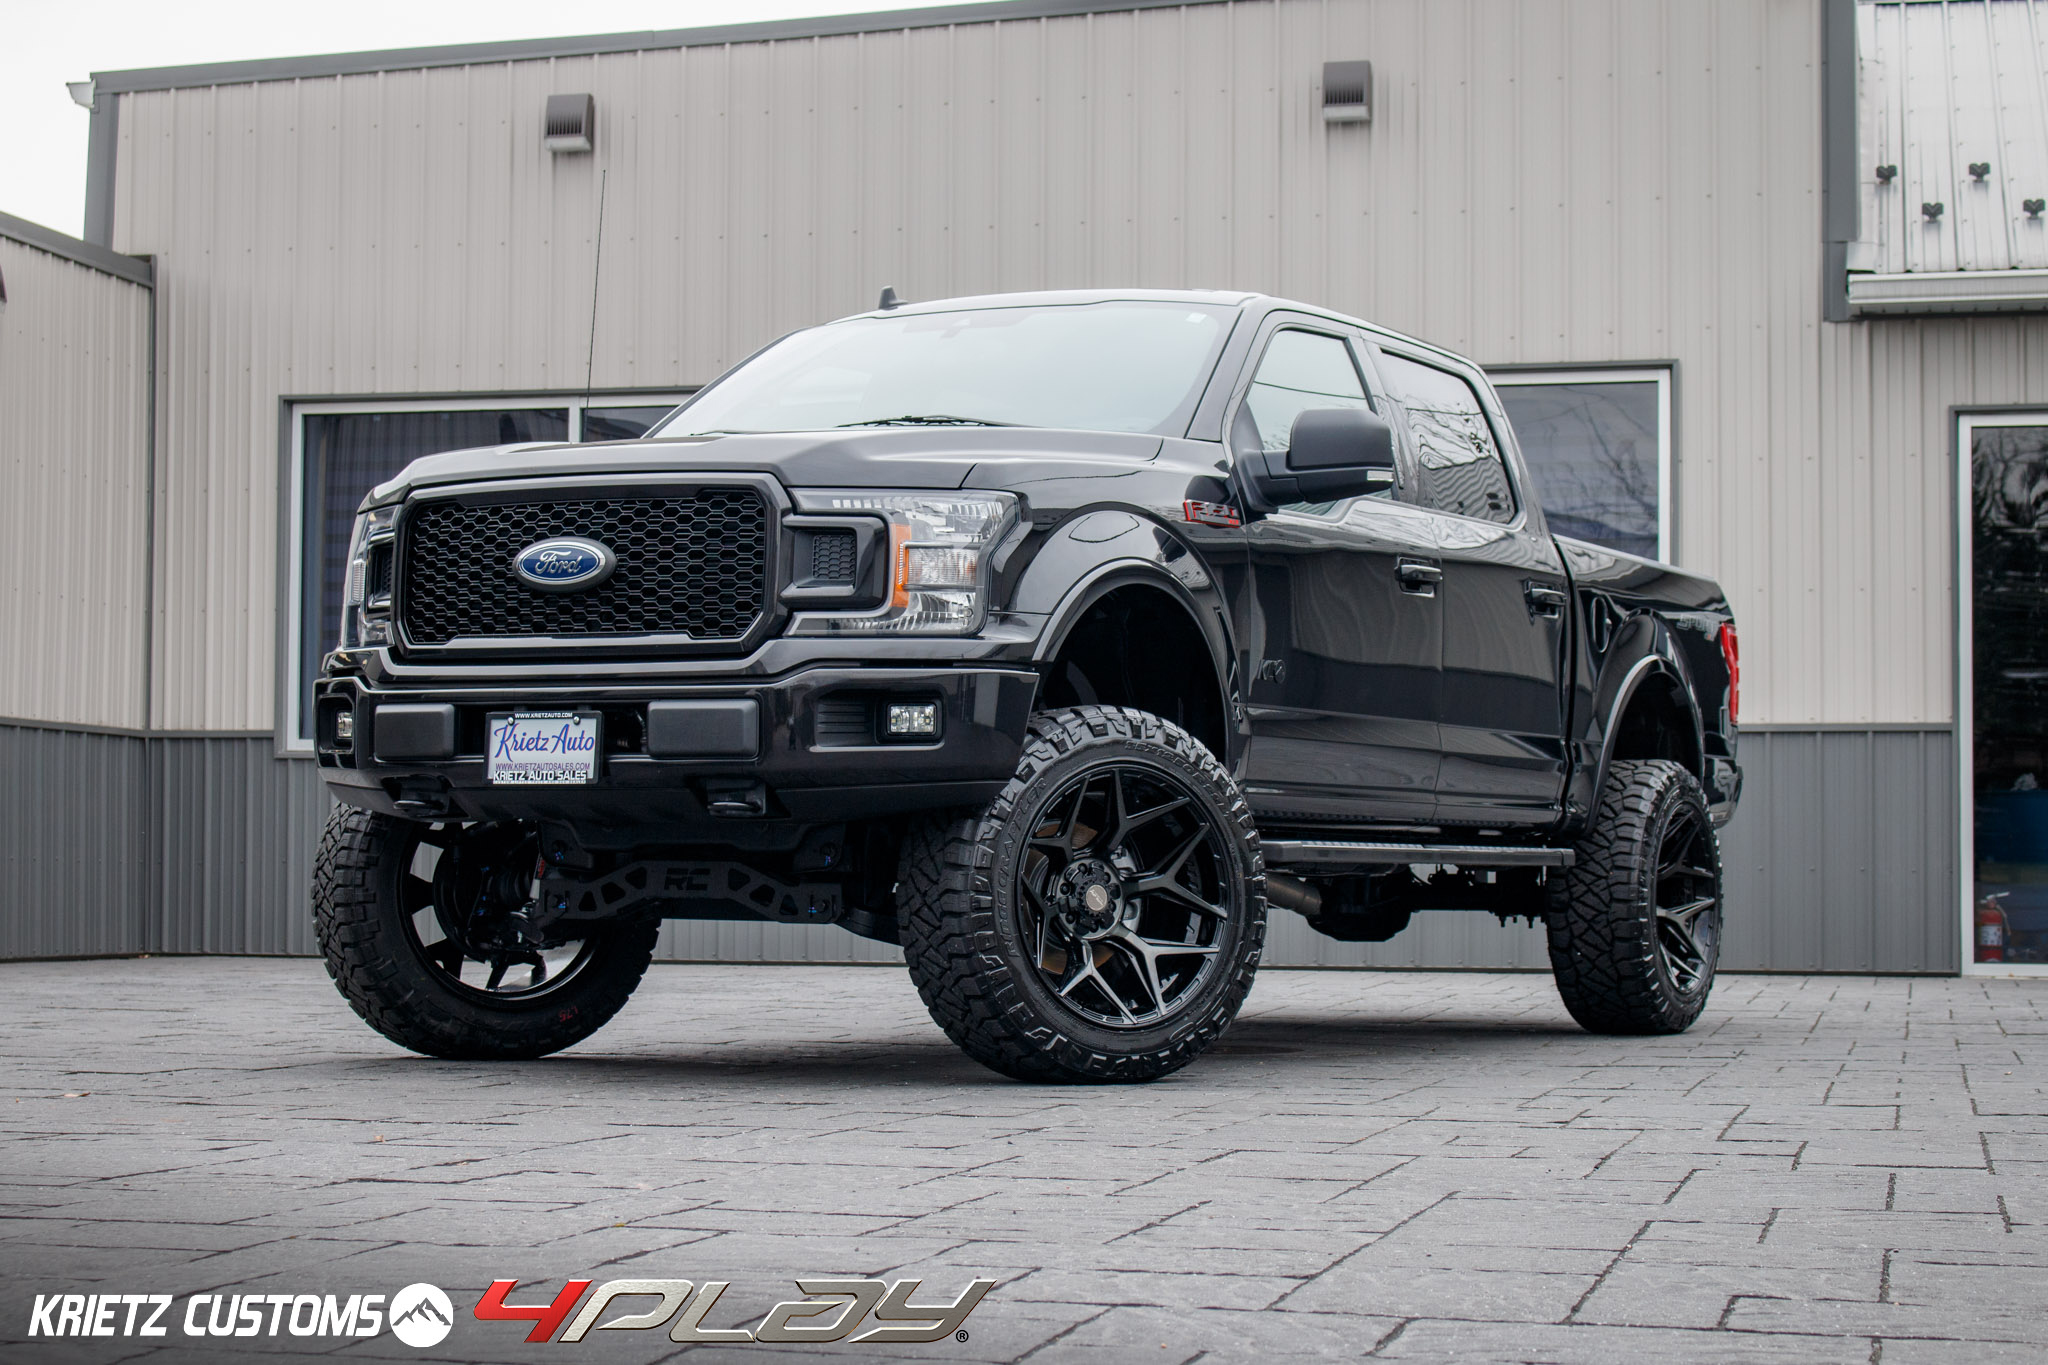 FORD F150 4PLAY WHEELS RIMS 4P06 22X12 35X12.5X22 NITTO TIRES 6 INCH ROUGH COUNTRY LIFT BY KRIETZ CUSTOMS 2